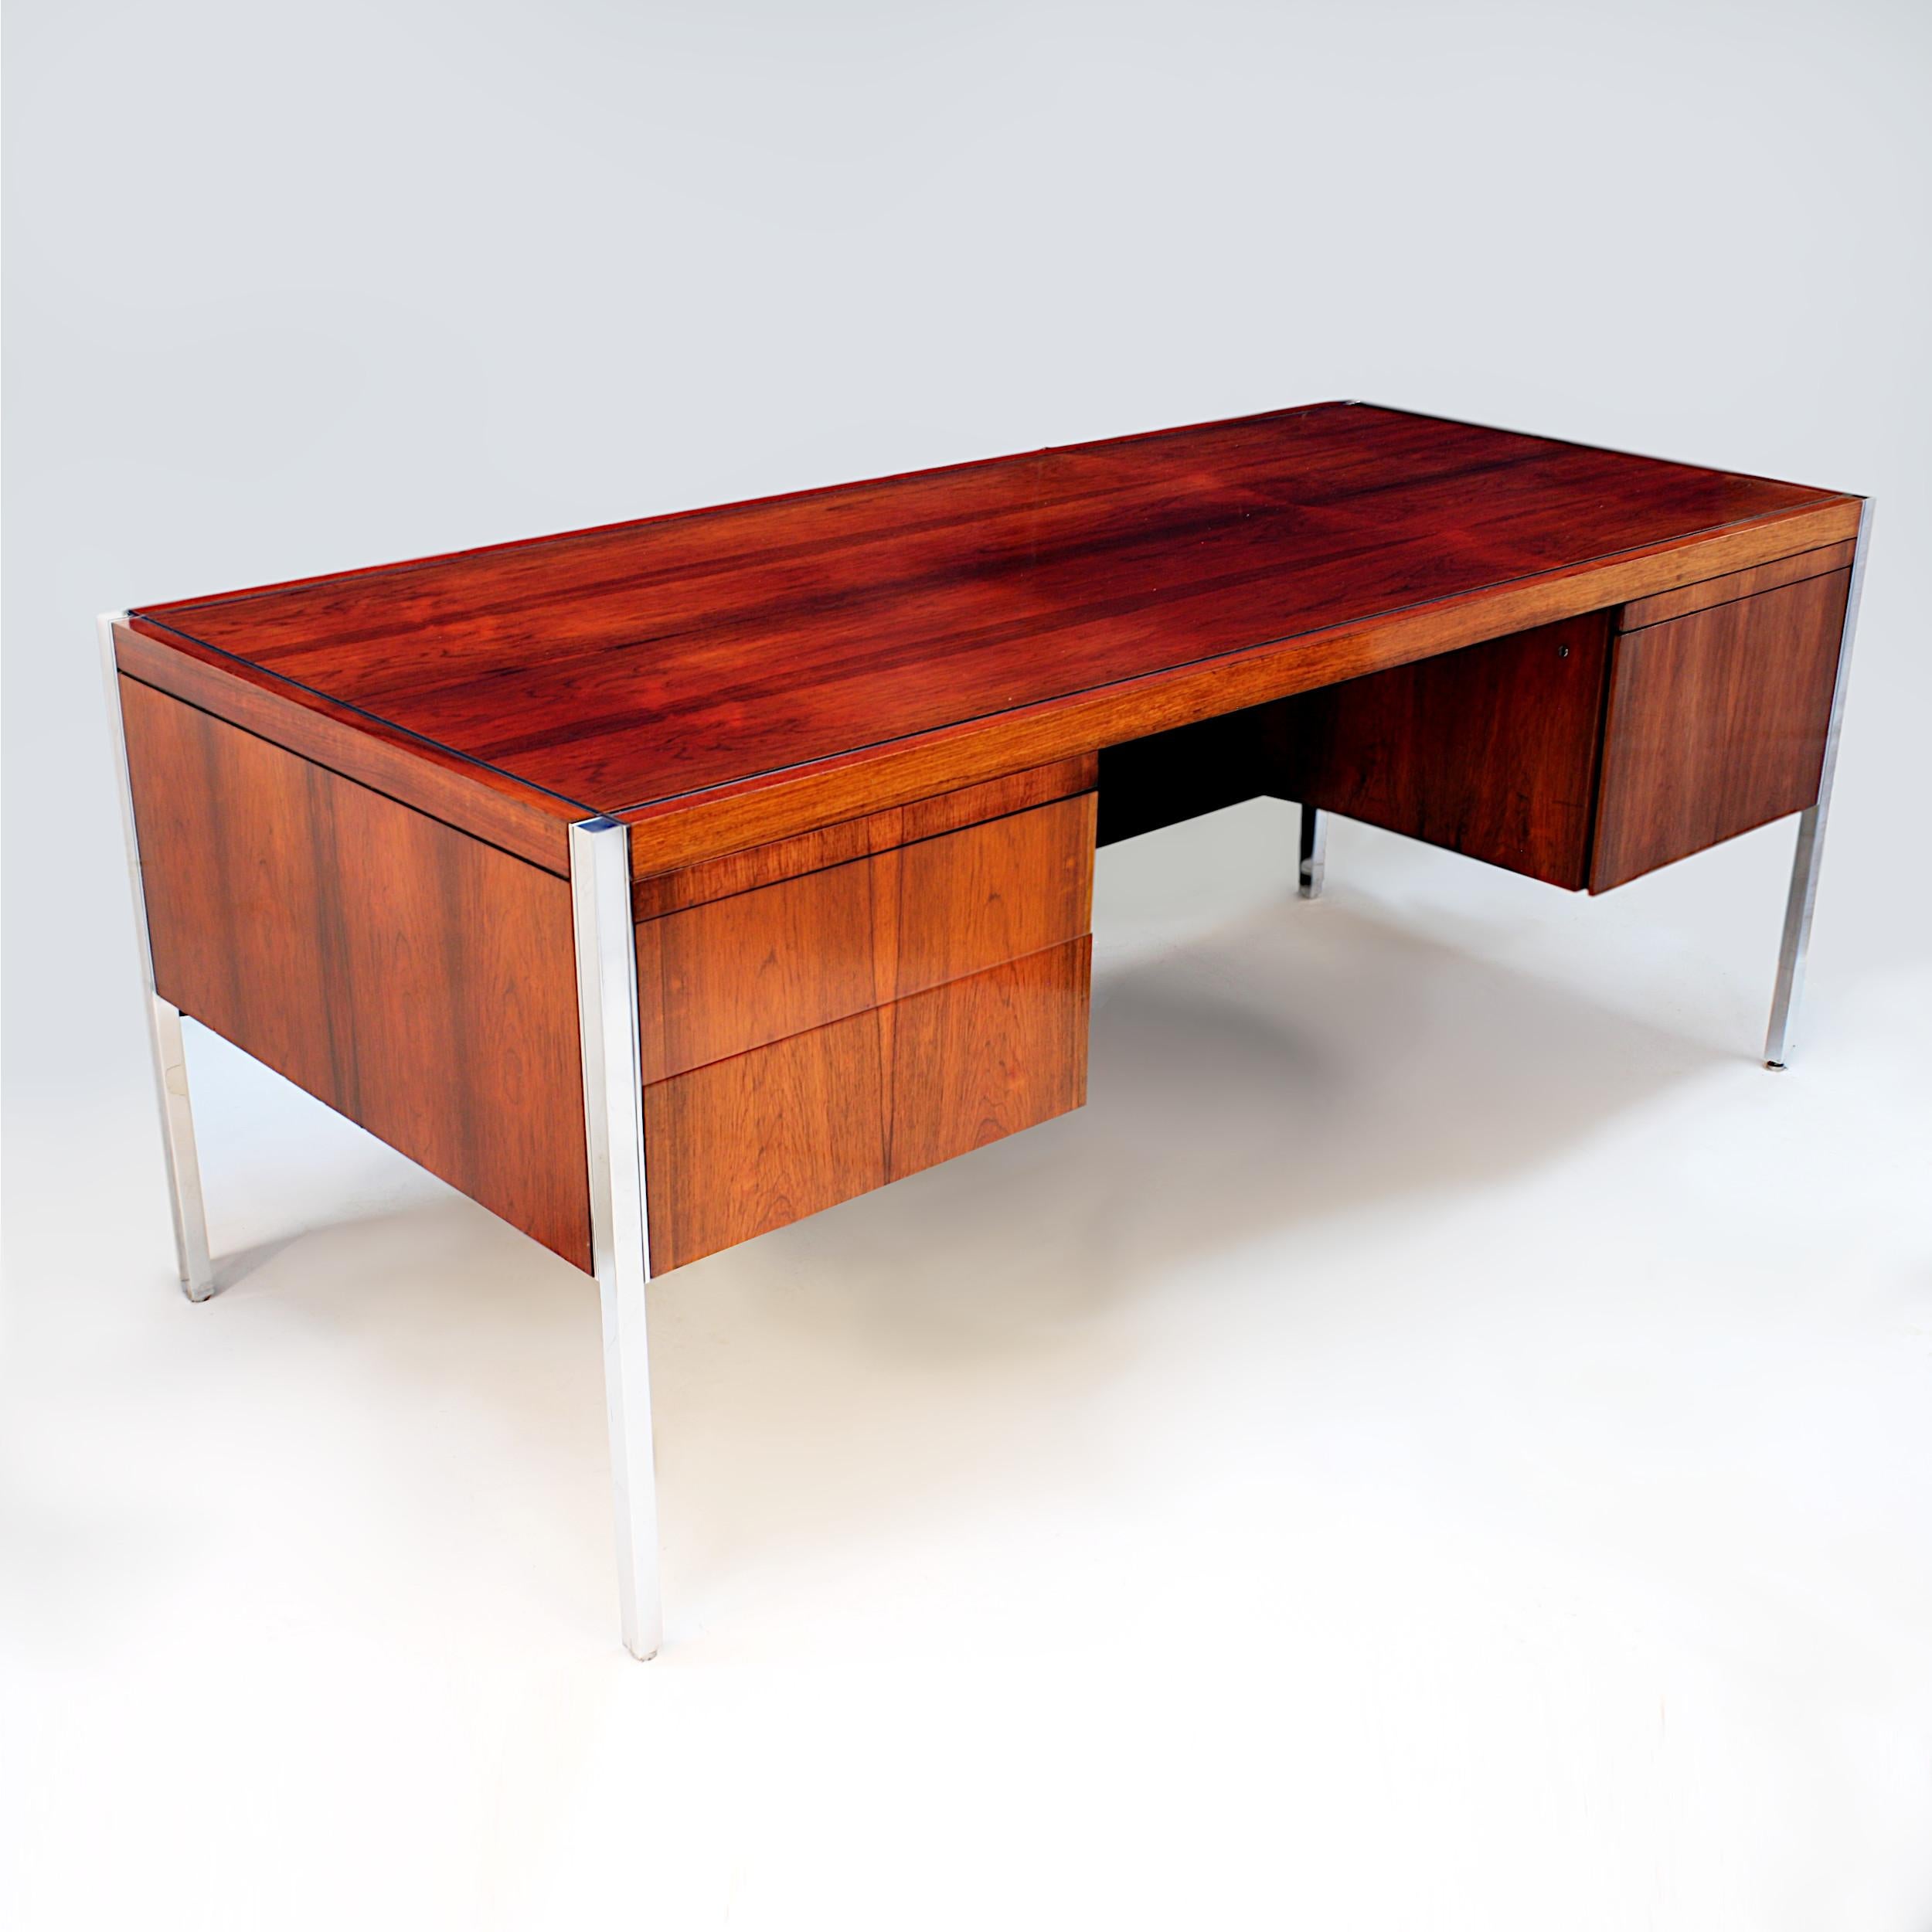 American 1970s Mid-Century Modern Rosewood Executive Desk by Richard Schultz for Knoll